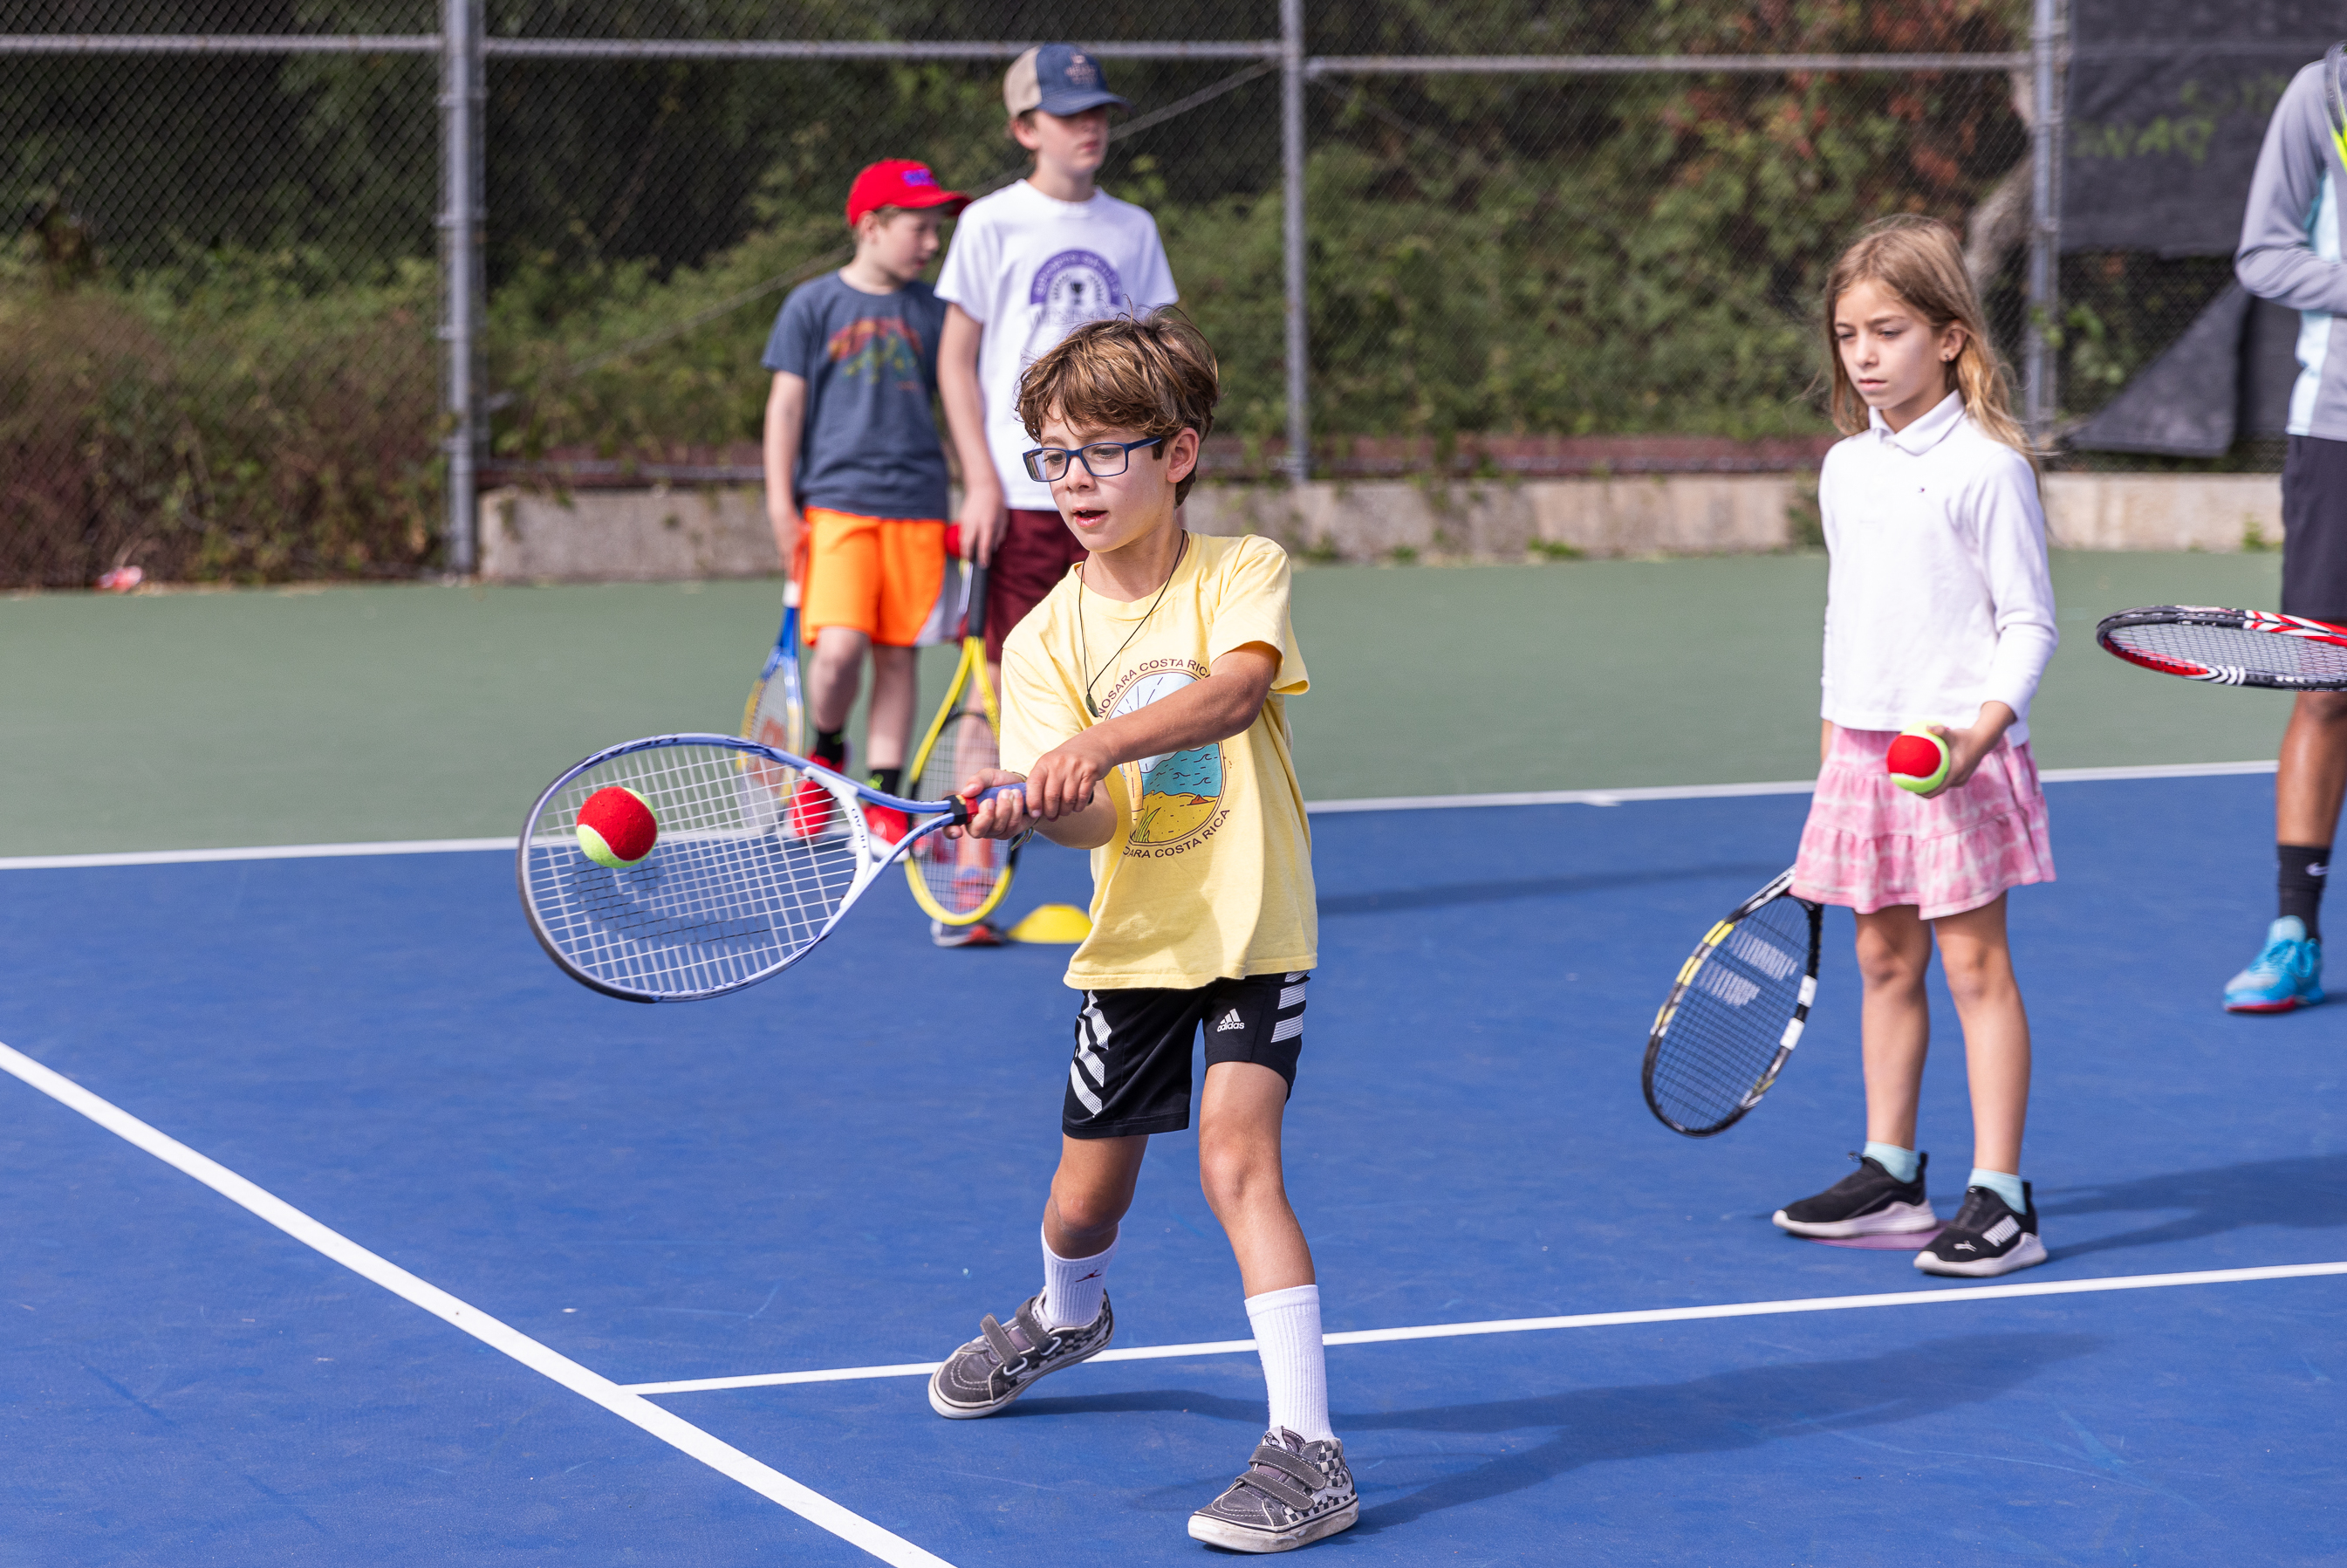 Tennis campers practice their forehand technique